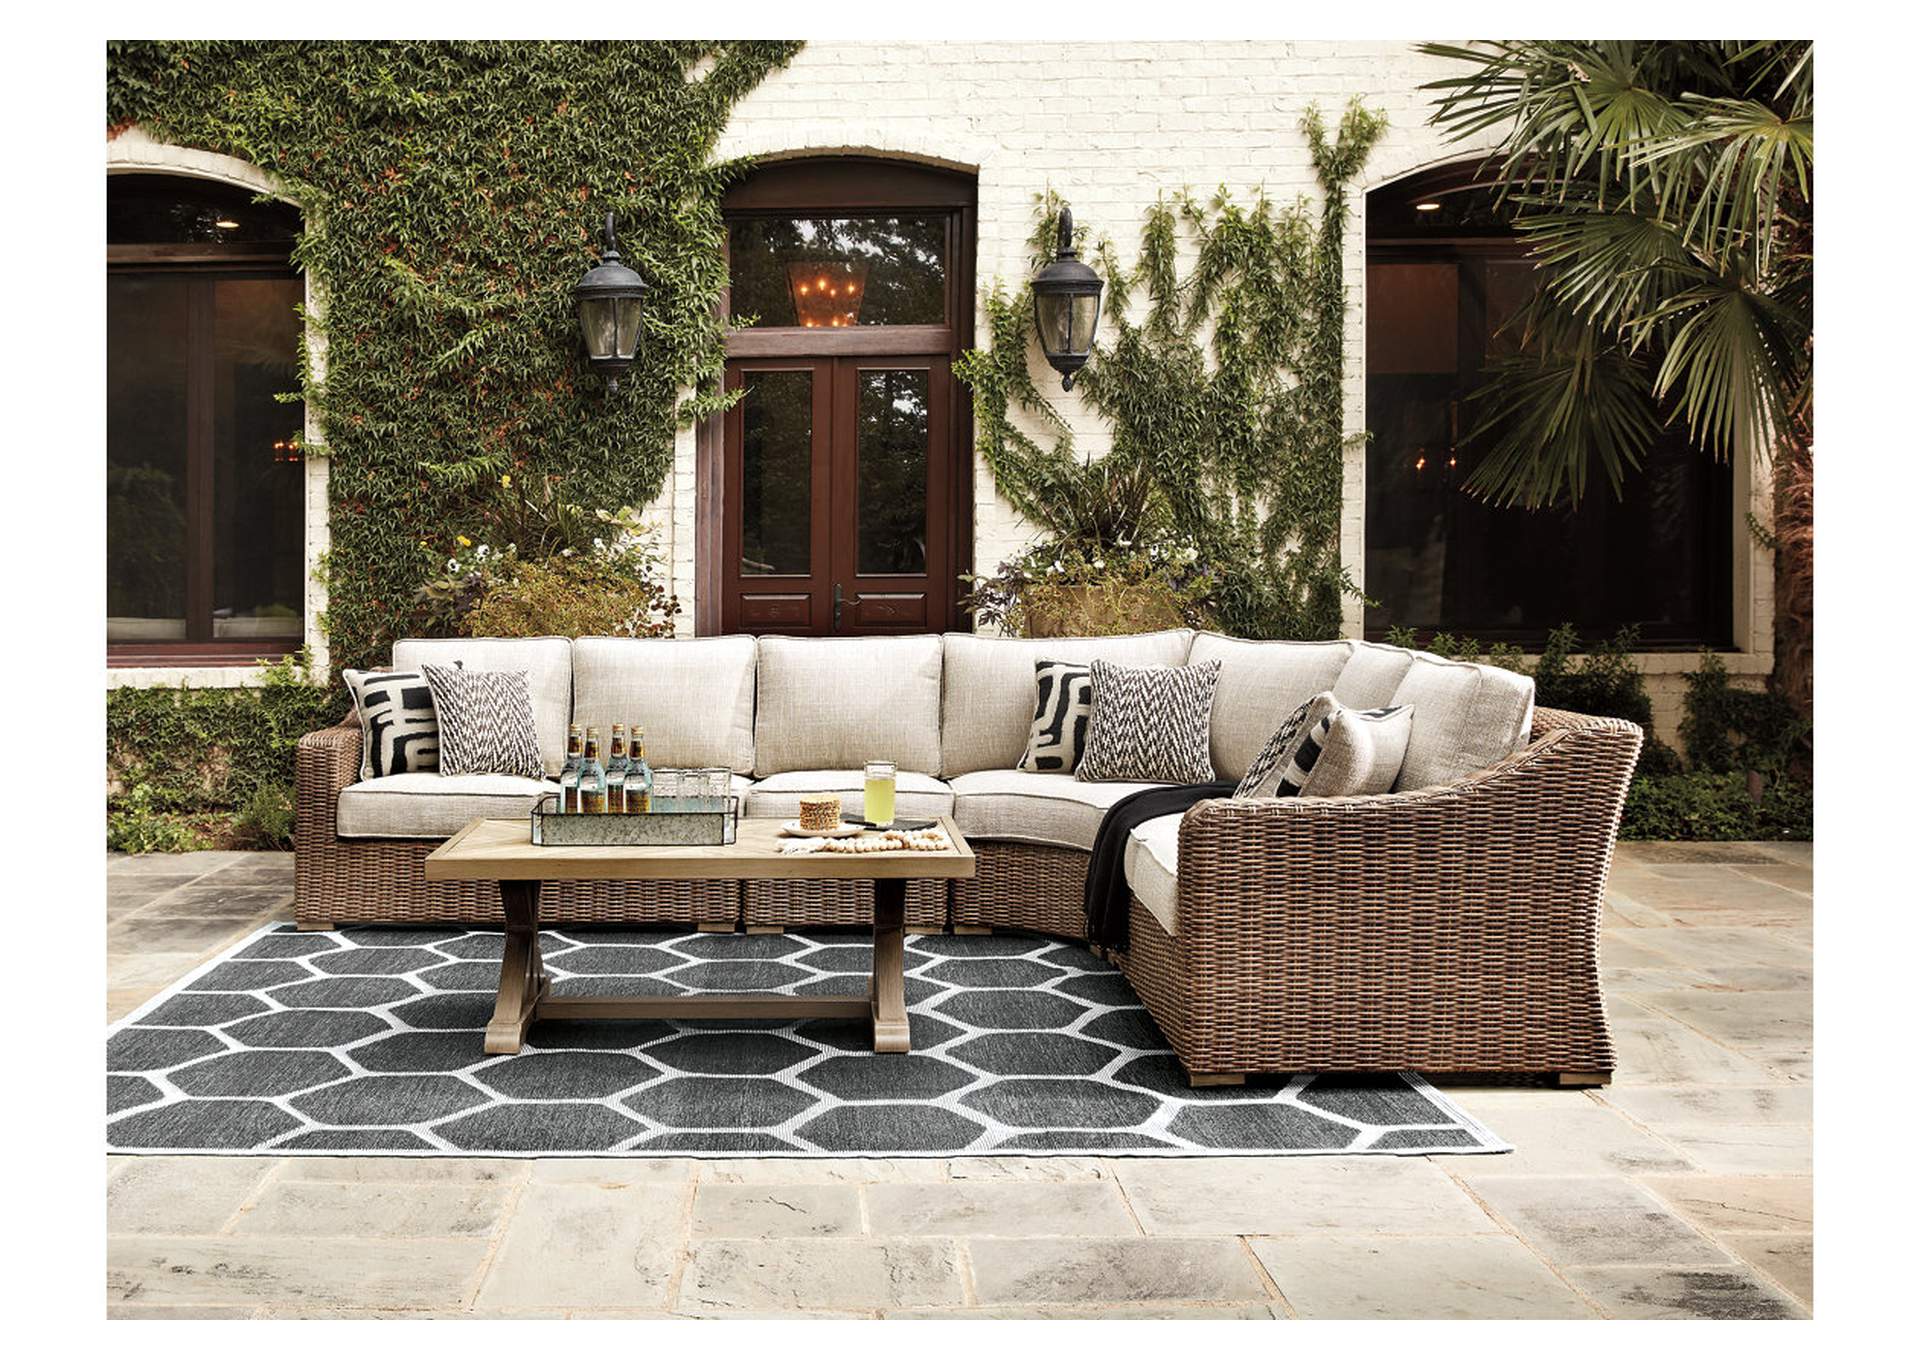 Beachcroft 4-Piece Outdoor Seating Set,Outdoor By Ashley